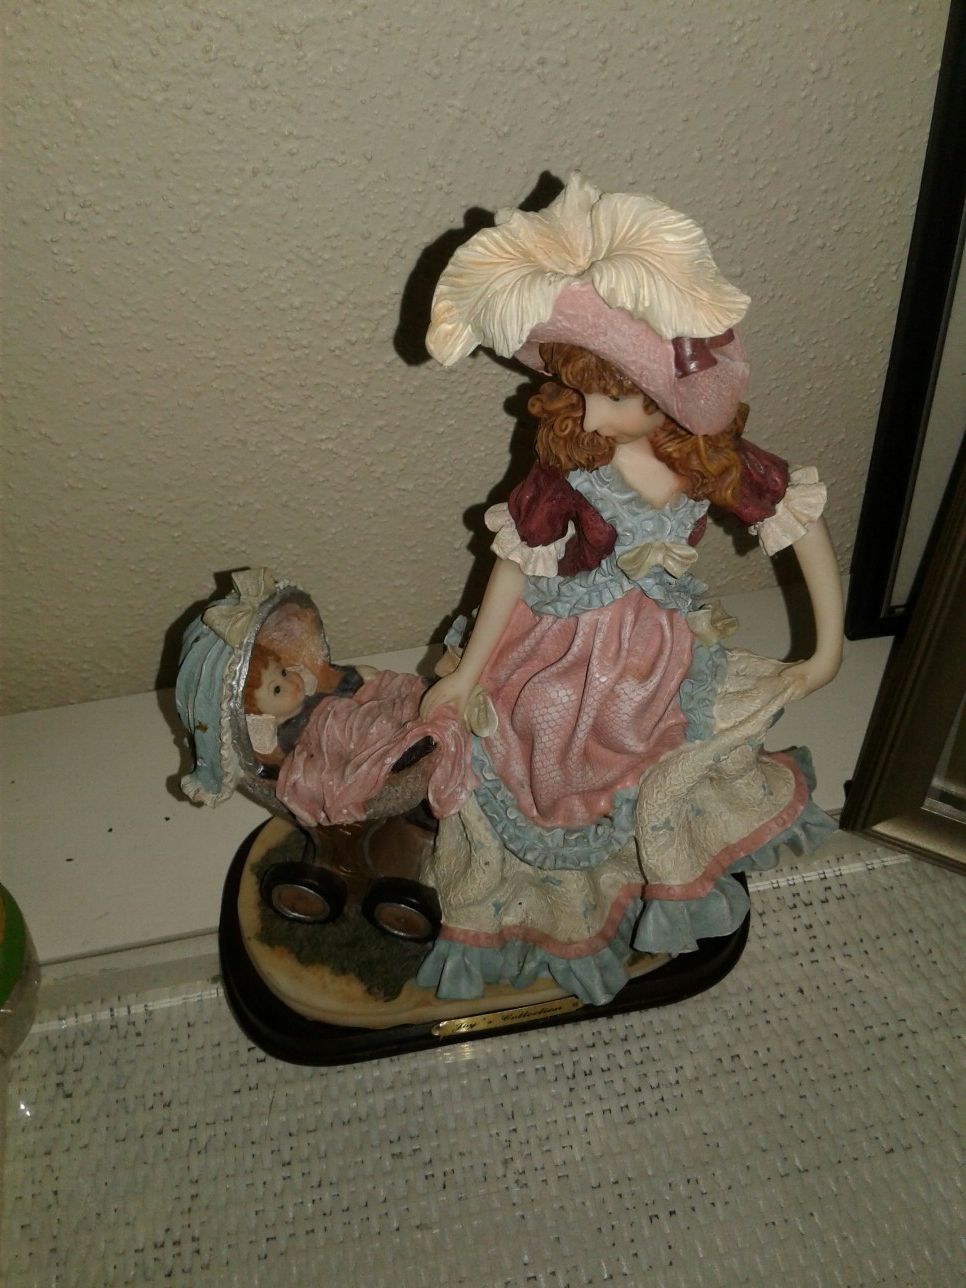 Figurine with baby in stroller